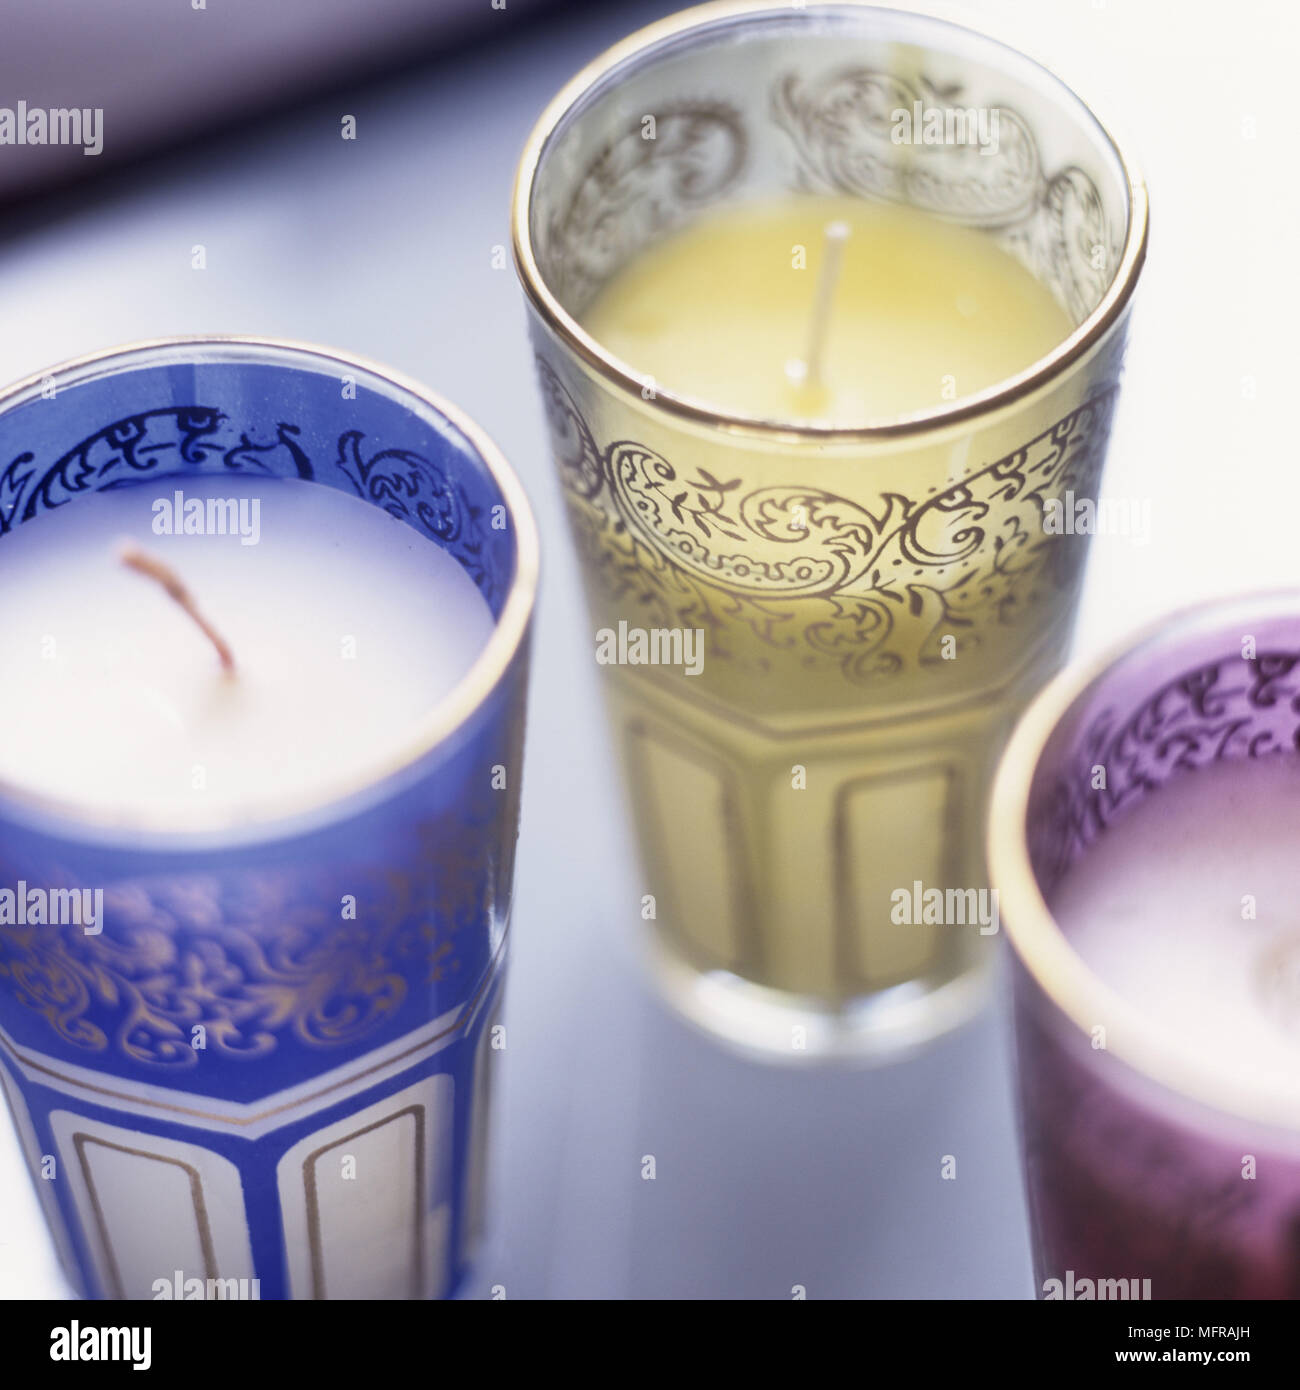 Candles in Moroccan tea glasses. Stock Photo